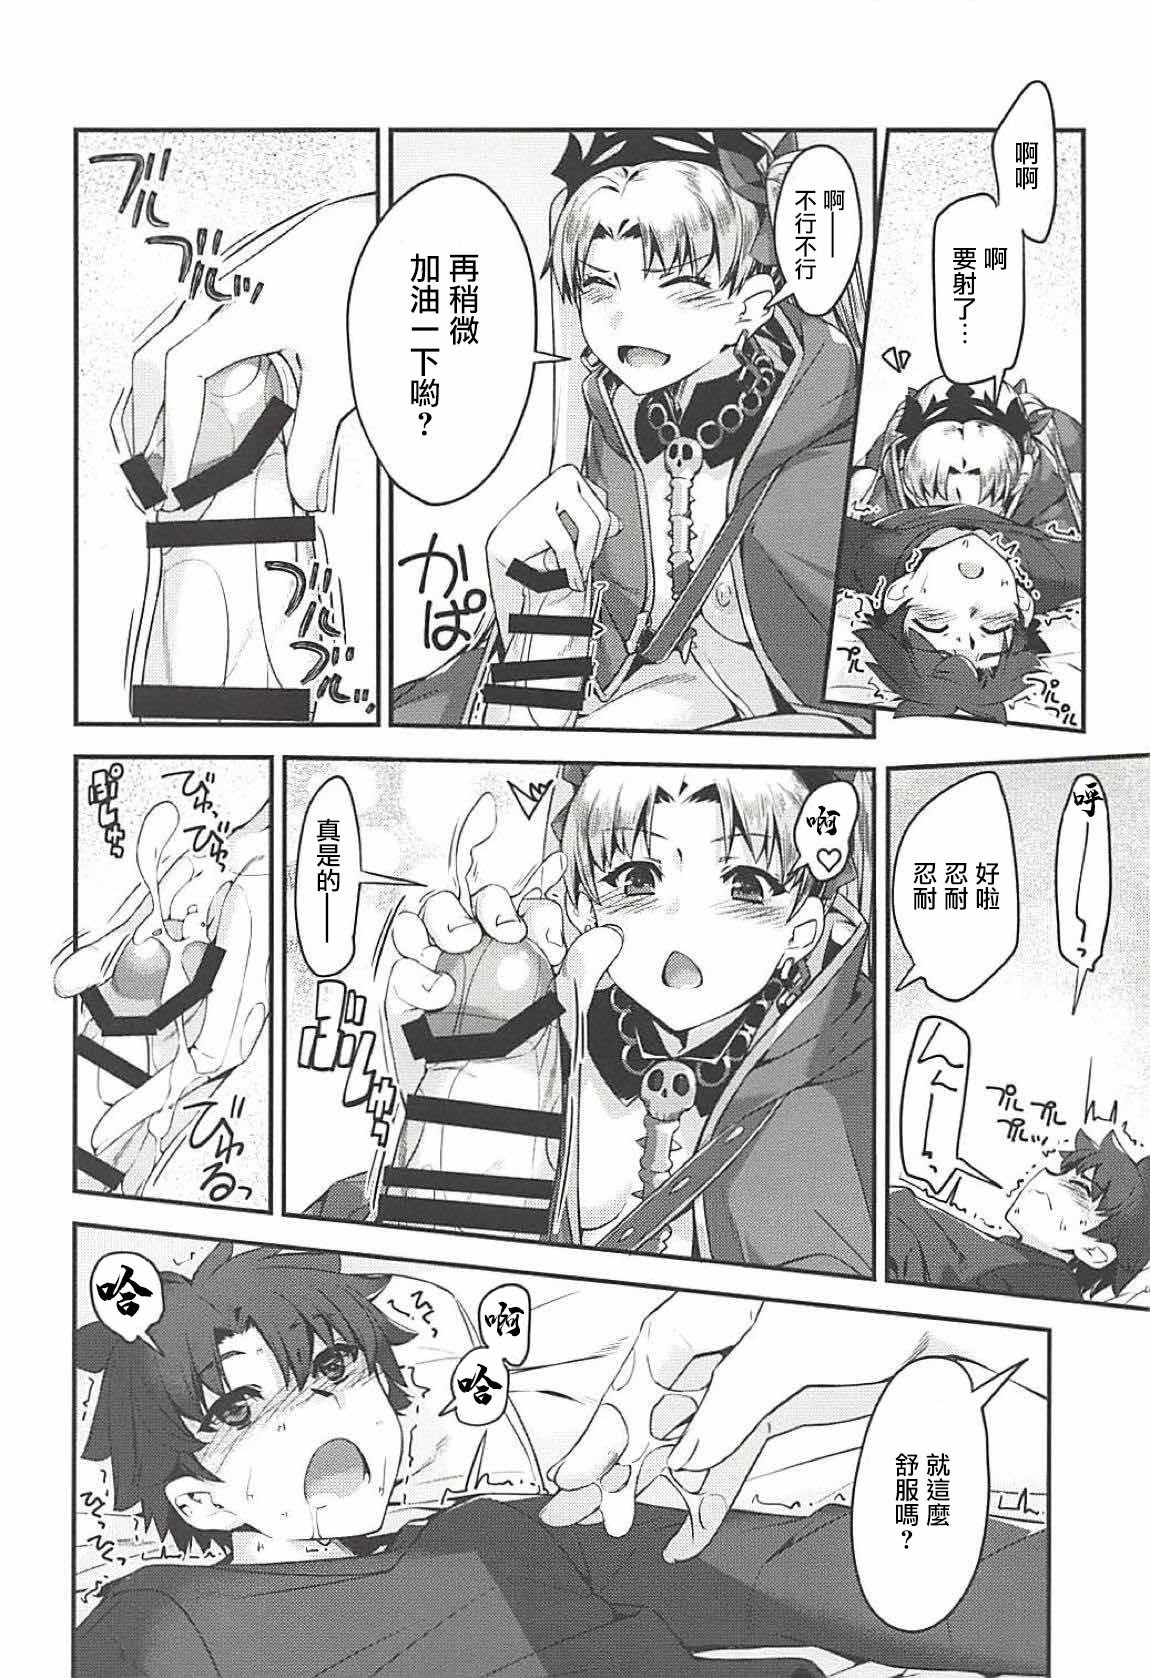 (C94) [Kansyouyou Marmotte (Mr.Lostman)] Ere-chan to! (Fate/Grand Order) [Chinese] (C94) [鑑賞用モルモット (Mr.Lostman)] エレちゃんと! (Fate/Grand Order) [中国翻訳]